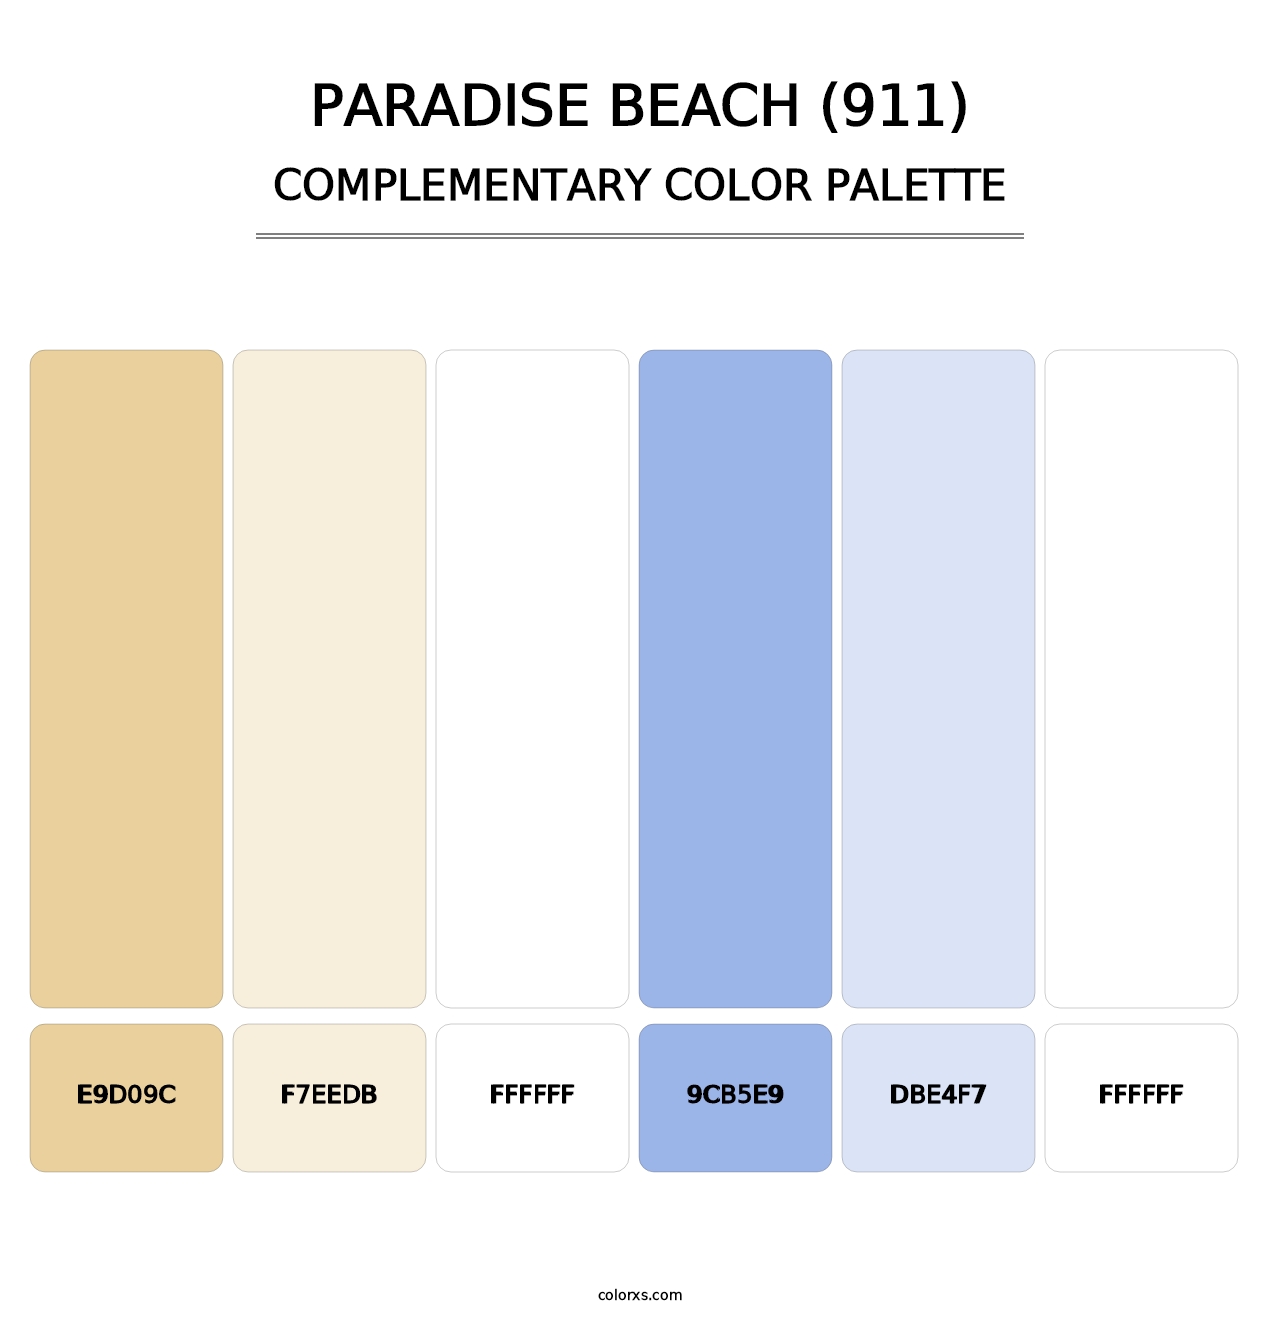 Paradise Beach (911) - Complementary Color Palette